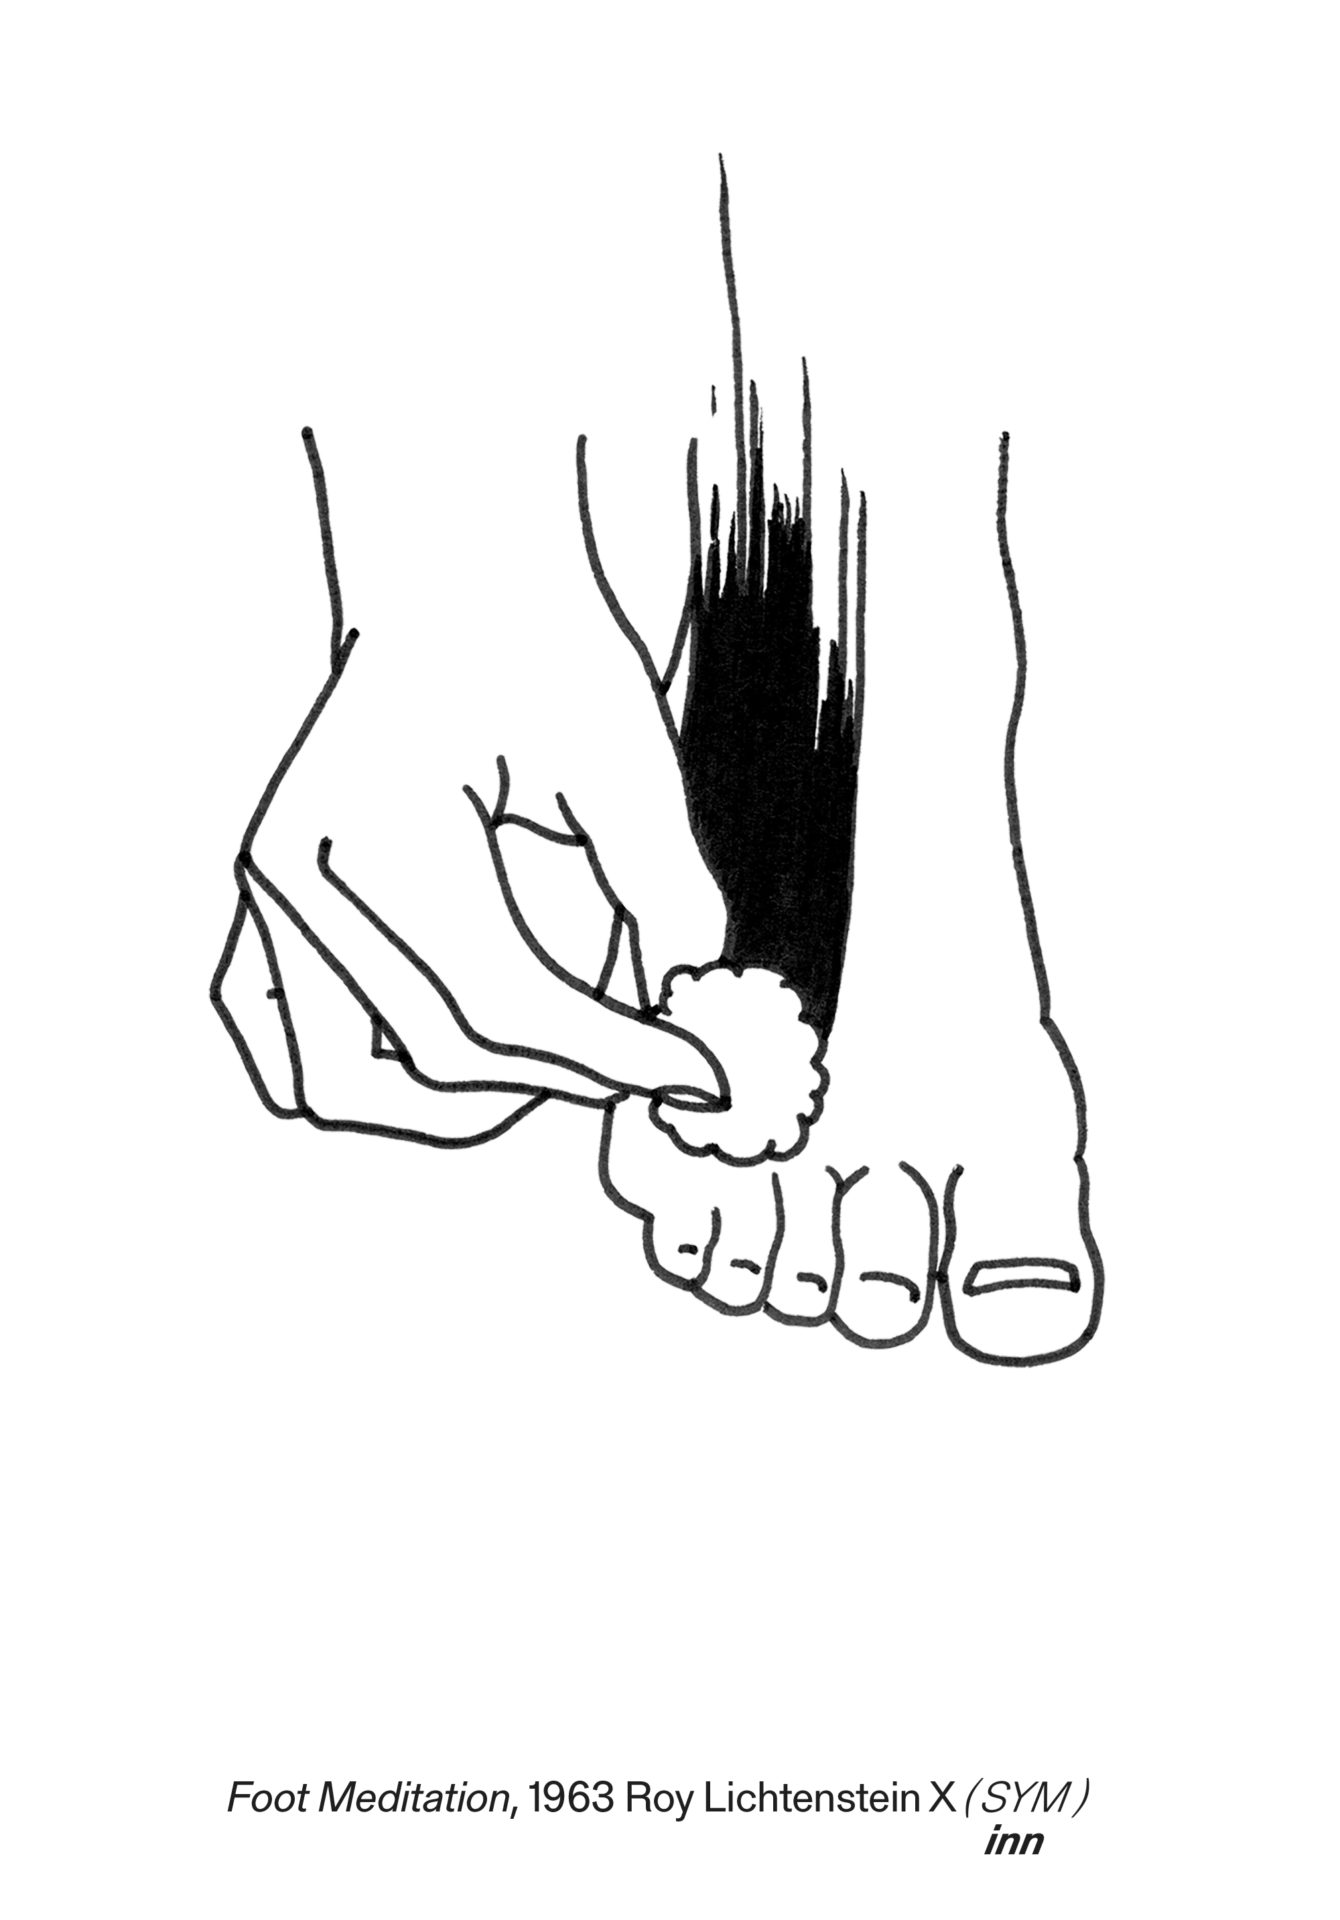 line drawing by Carl June of a hand holding a cotton bud over a foot with a black ink trace. Title: Foot Meditation, 1963 Roy Lichtenstein X ( SYM ) inn